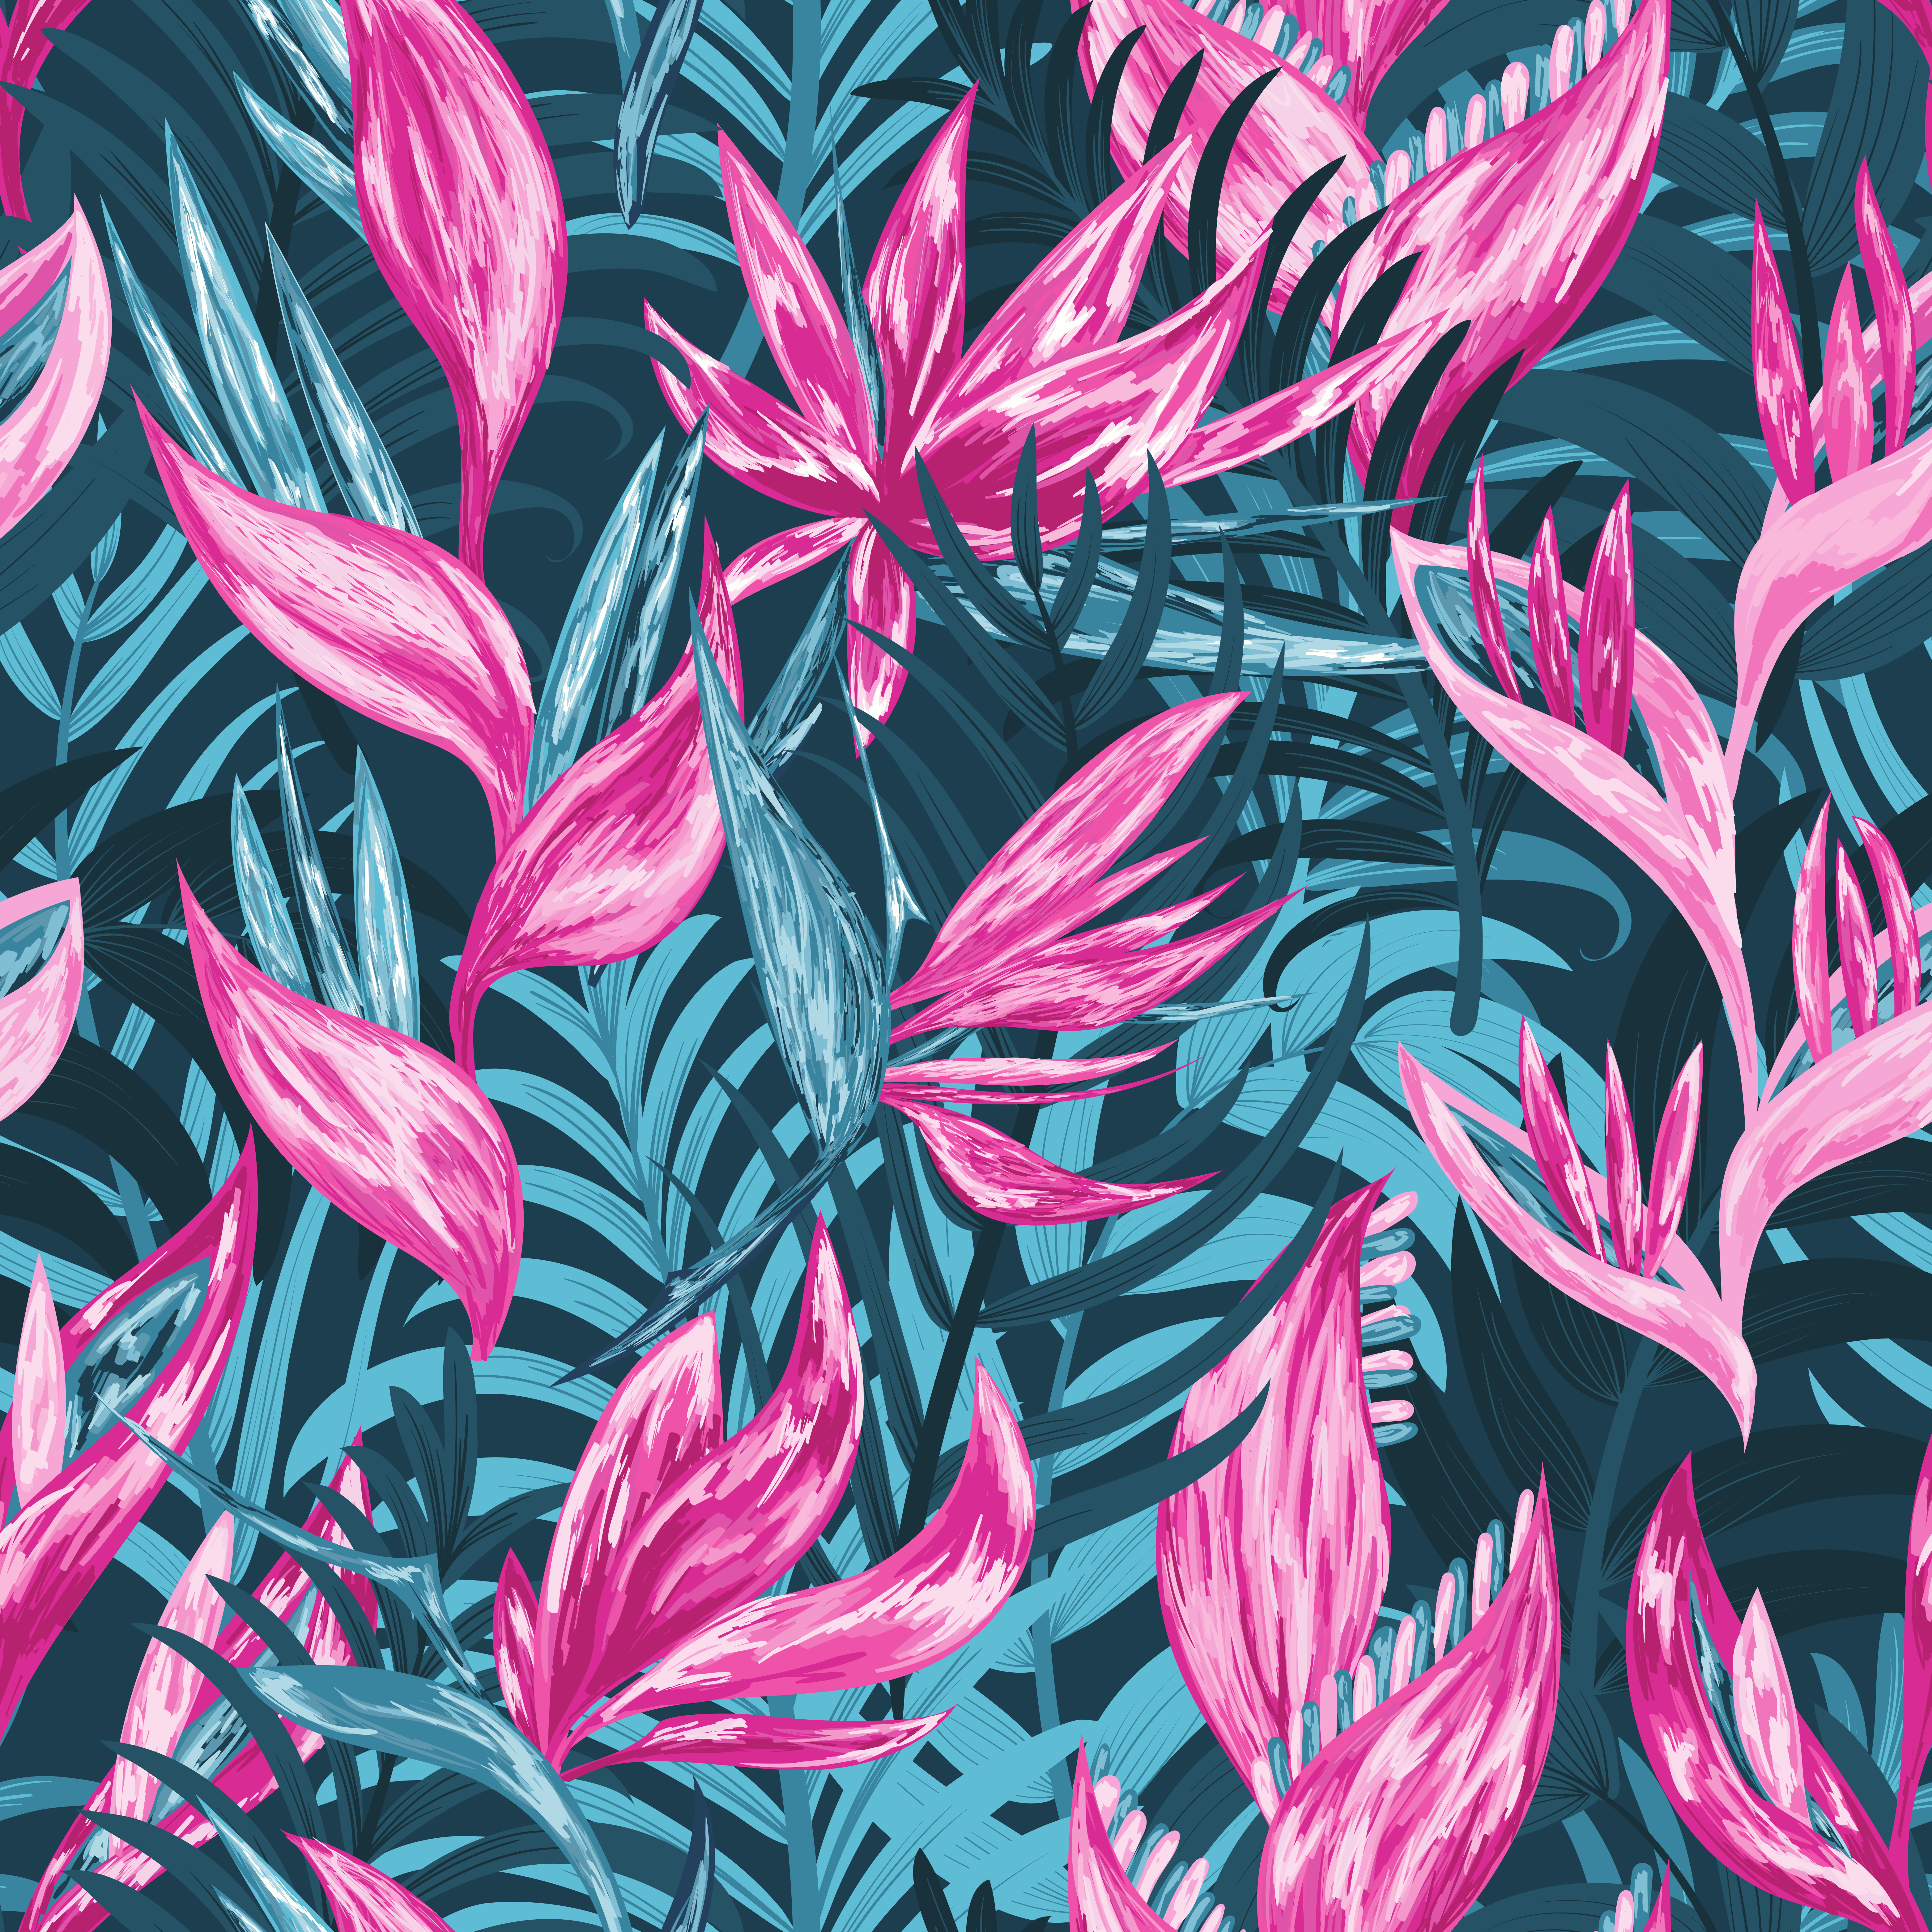 Abstract Flowers Night Jungle Leaves Vector Pattern 6250x6250